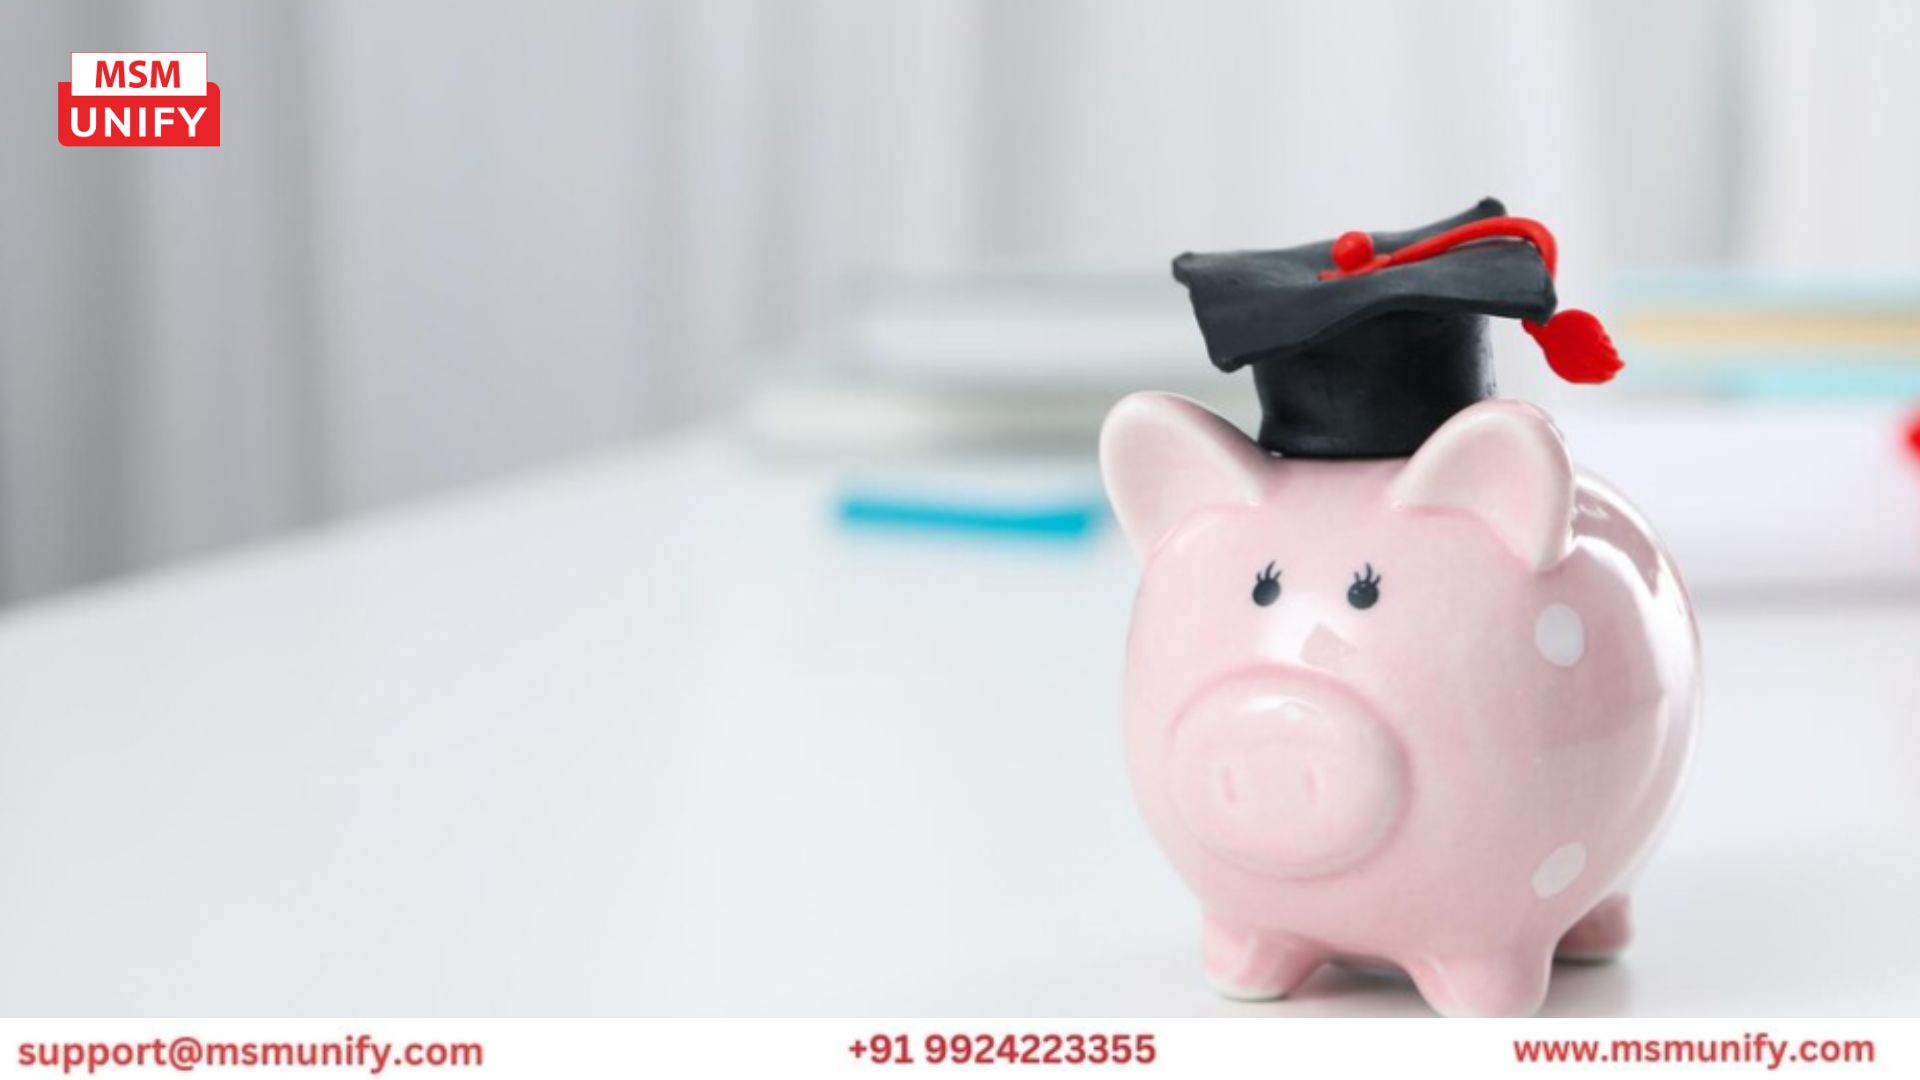 Discover how to maximize savings with <a href="https://www.msmunify.com/student-gic/">GIC Canada</a> education. Gain insights into smart tactics for cutting costs and investing wisely in your future.
Learn effective cost-cutting strategies for GICs tailored to Canadian education. 
